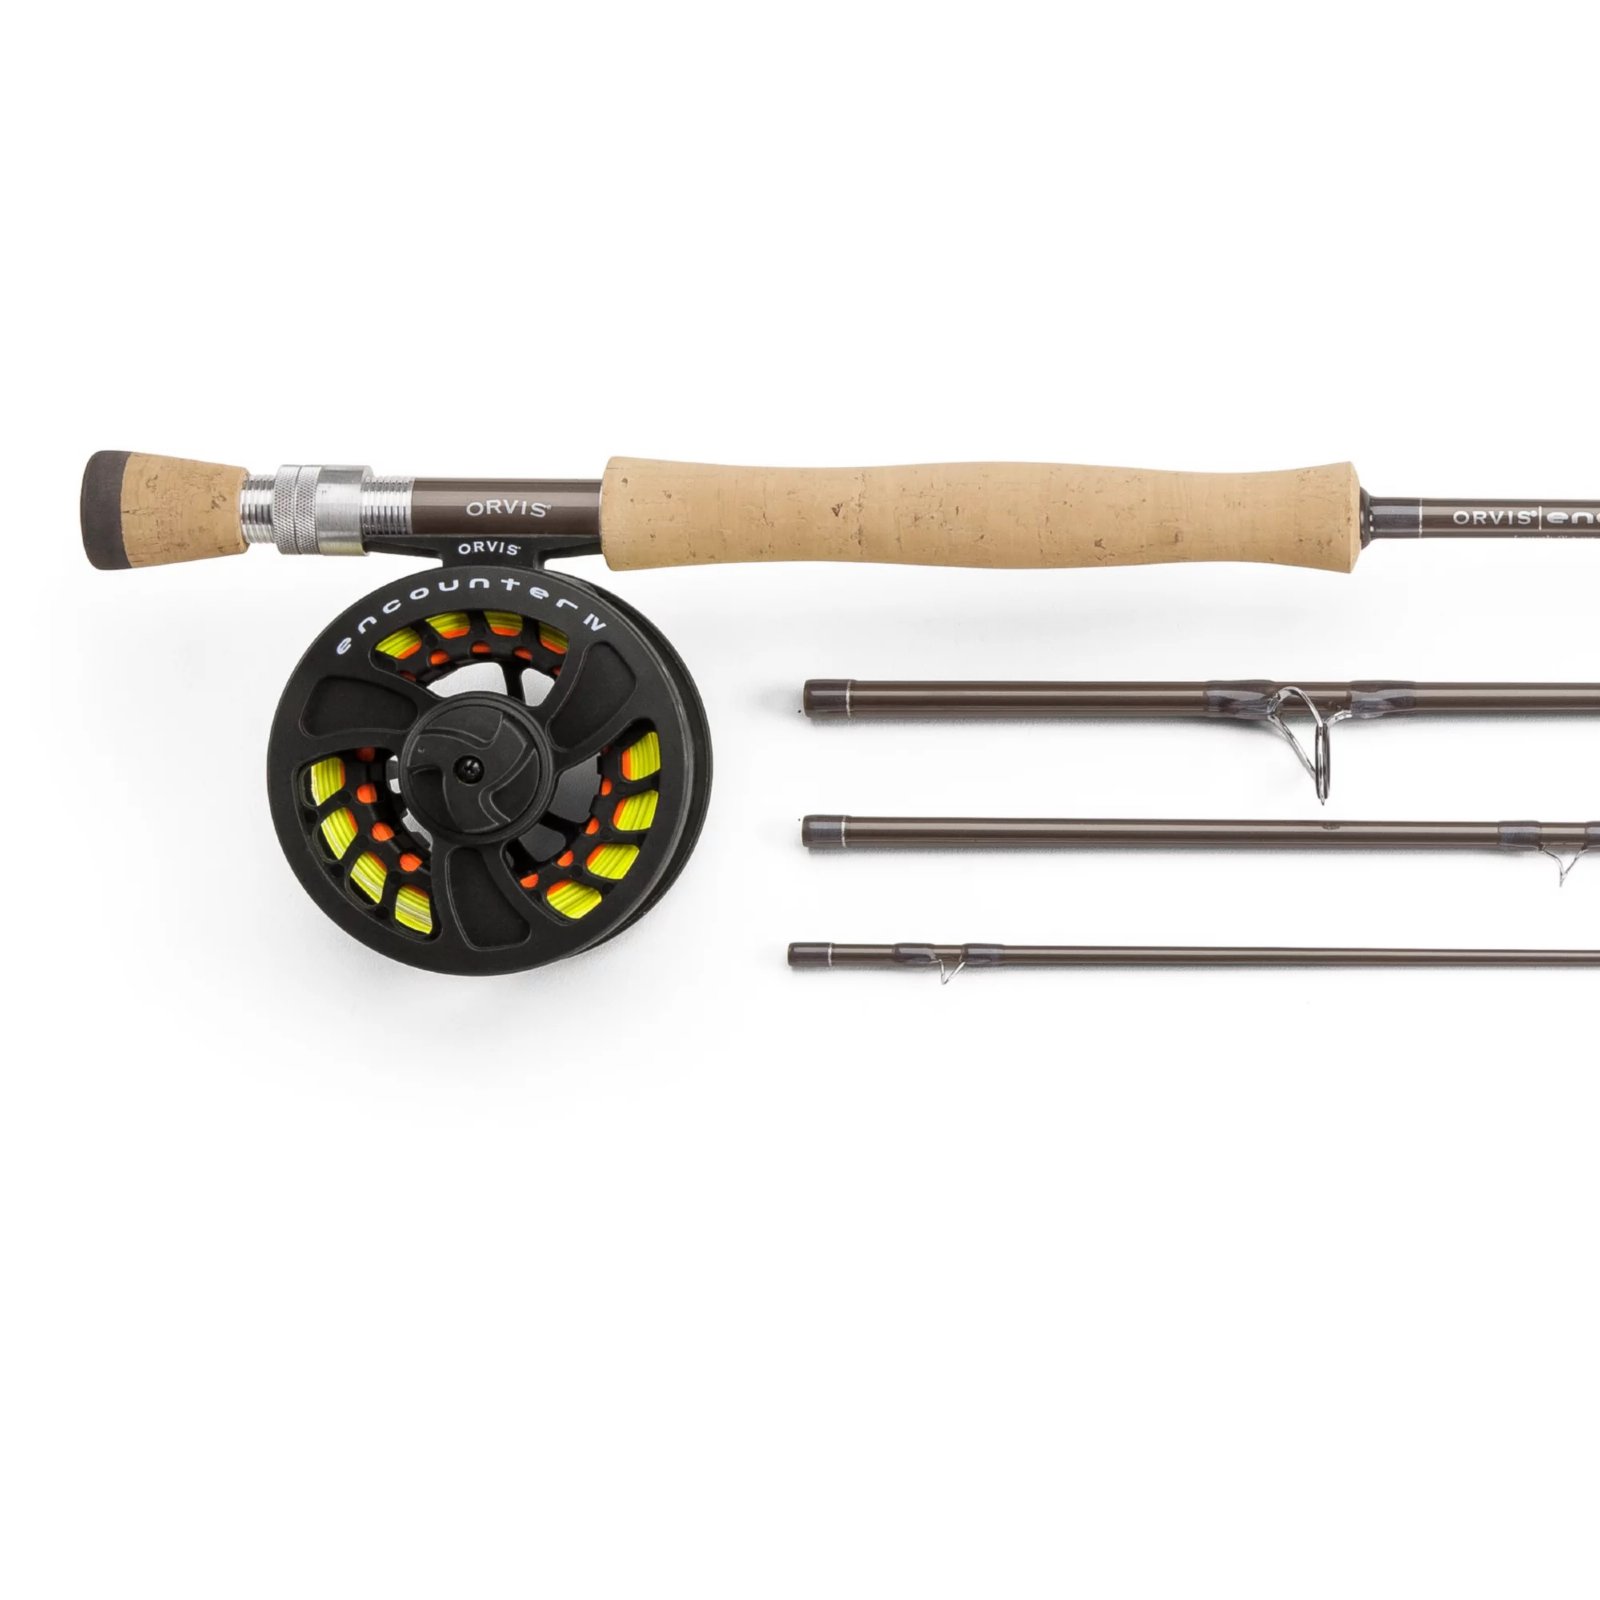 Orvis Encounter 905-4 5-weight 9' Fly Rod Outfit 